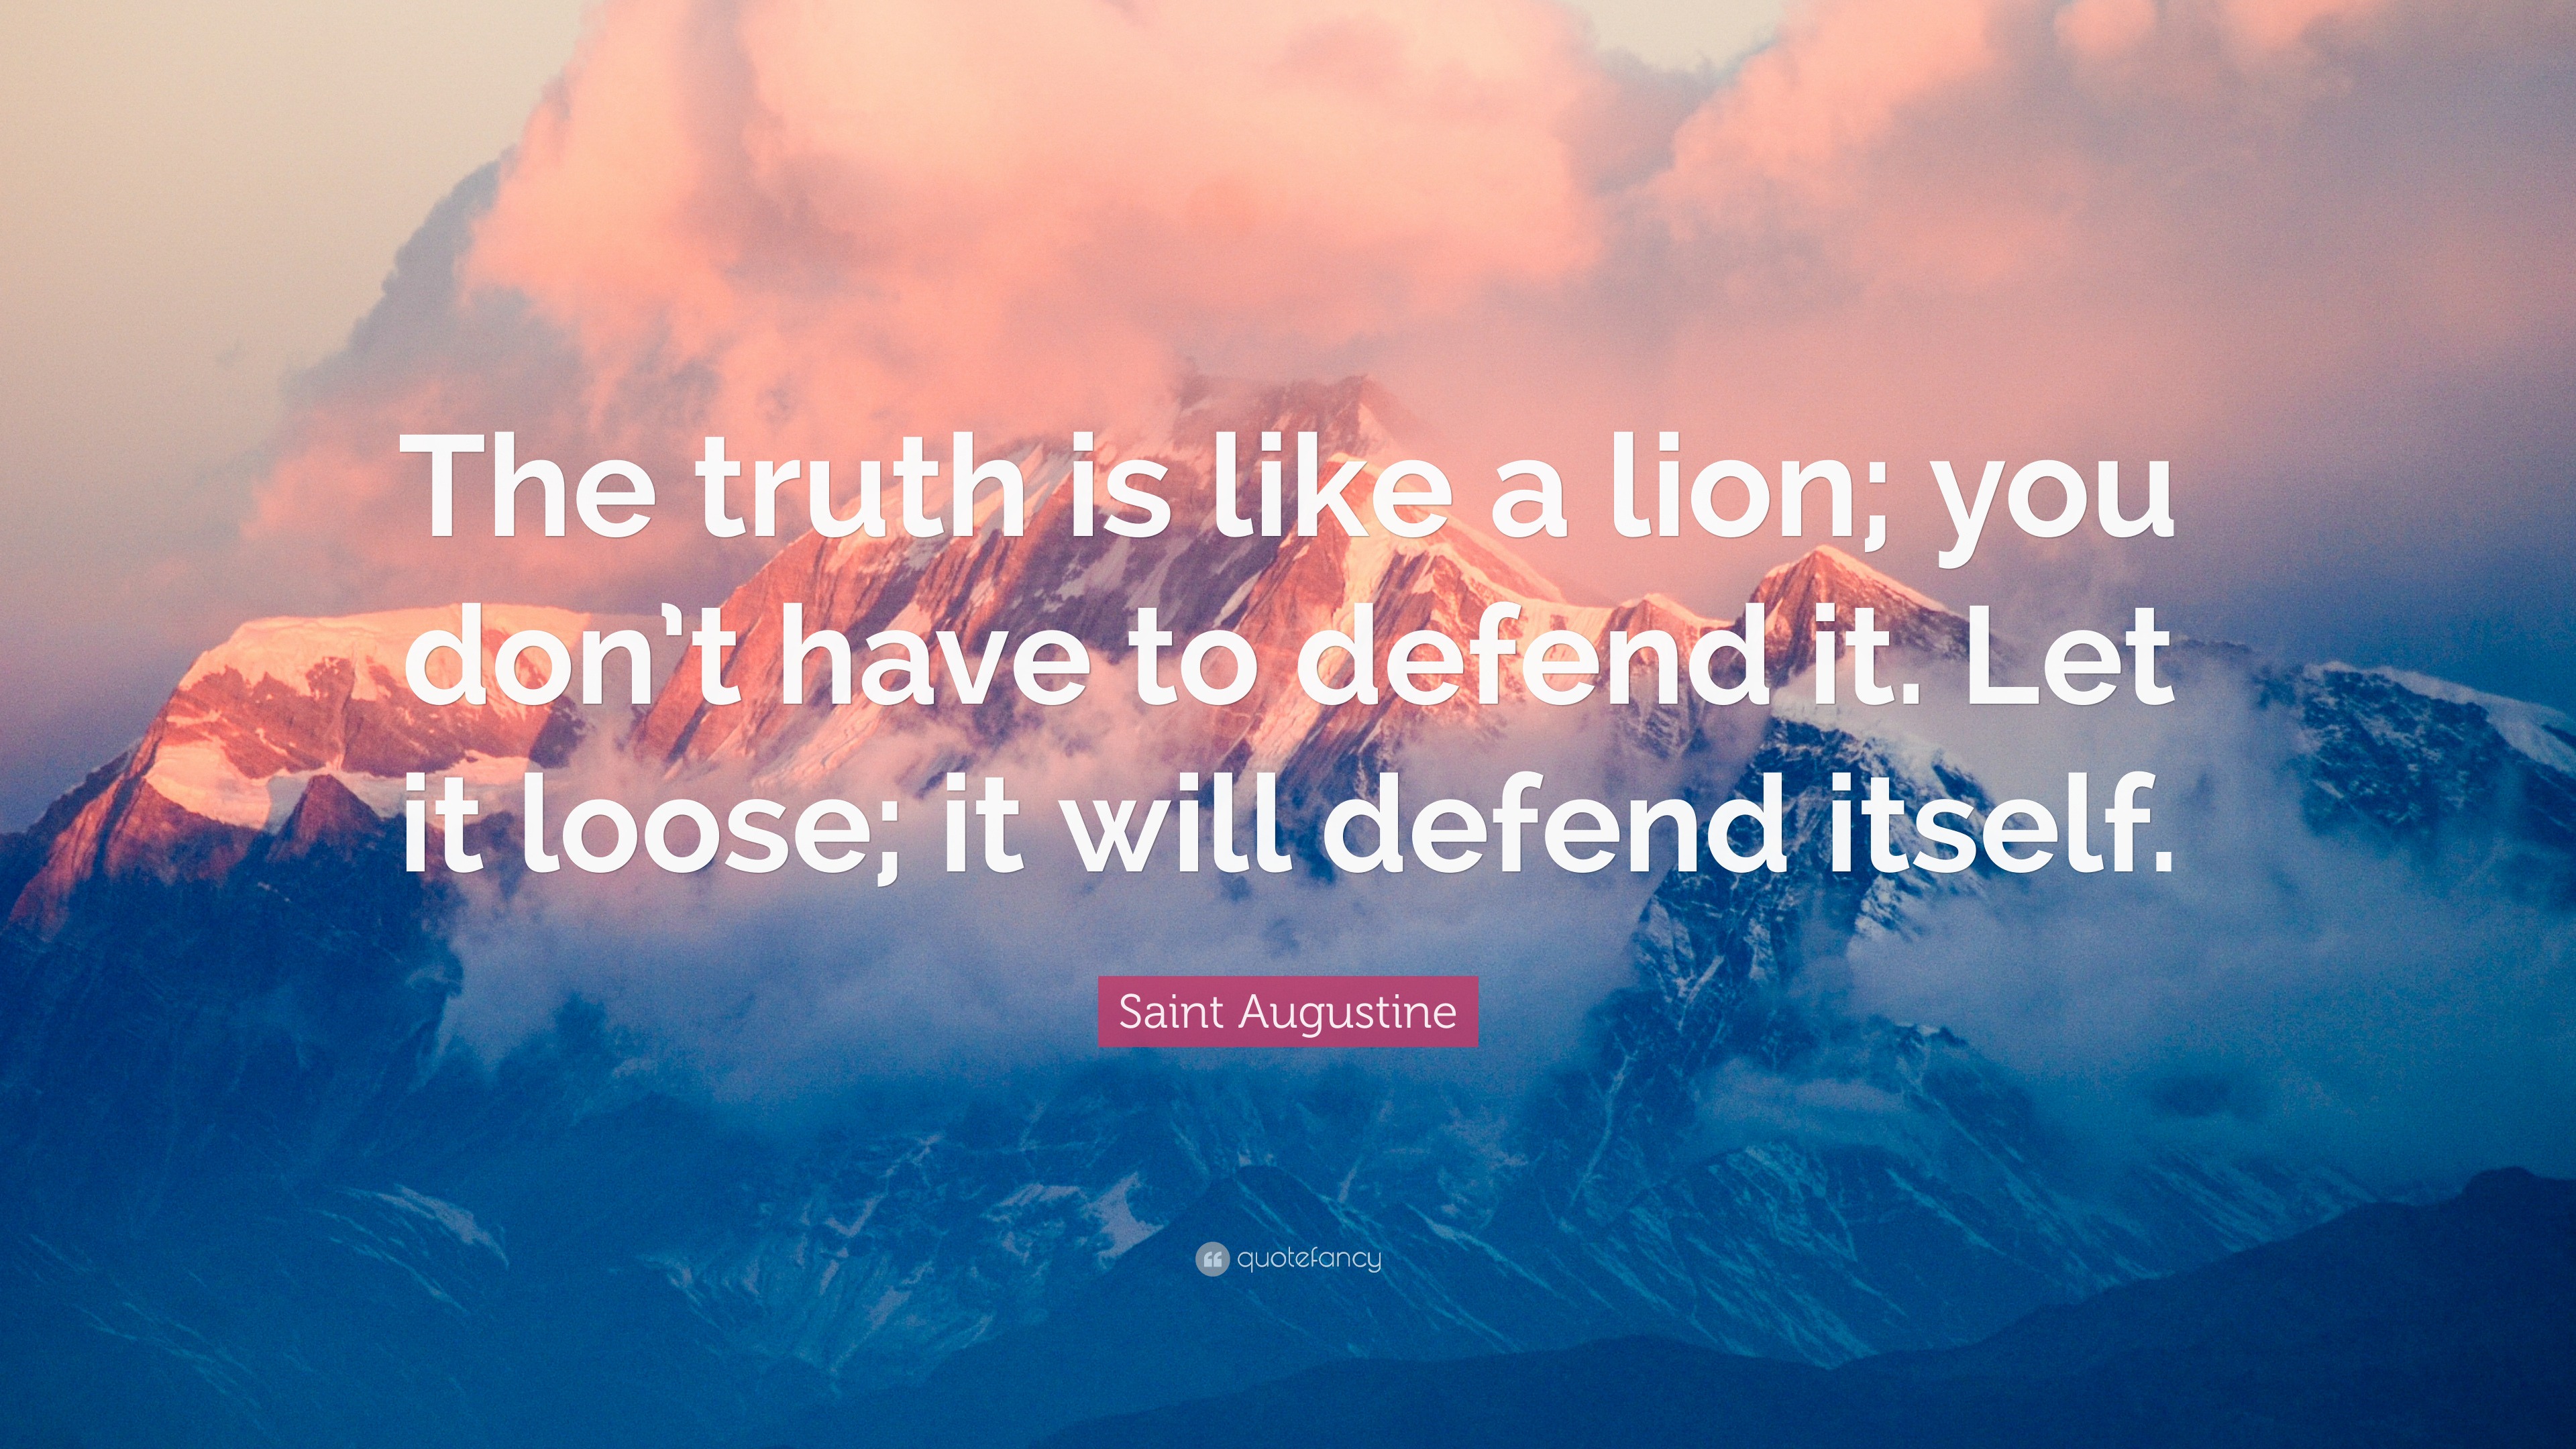 Saint Augustine Quote: "The truth is like a lion; you don ...